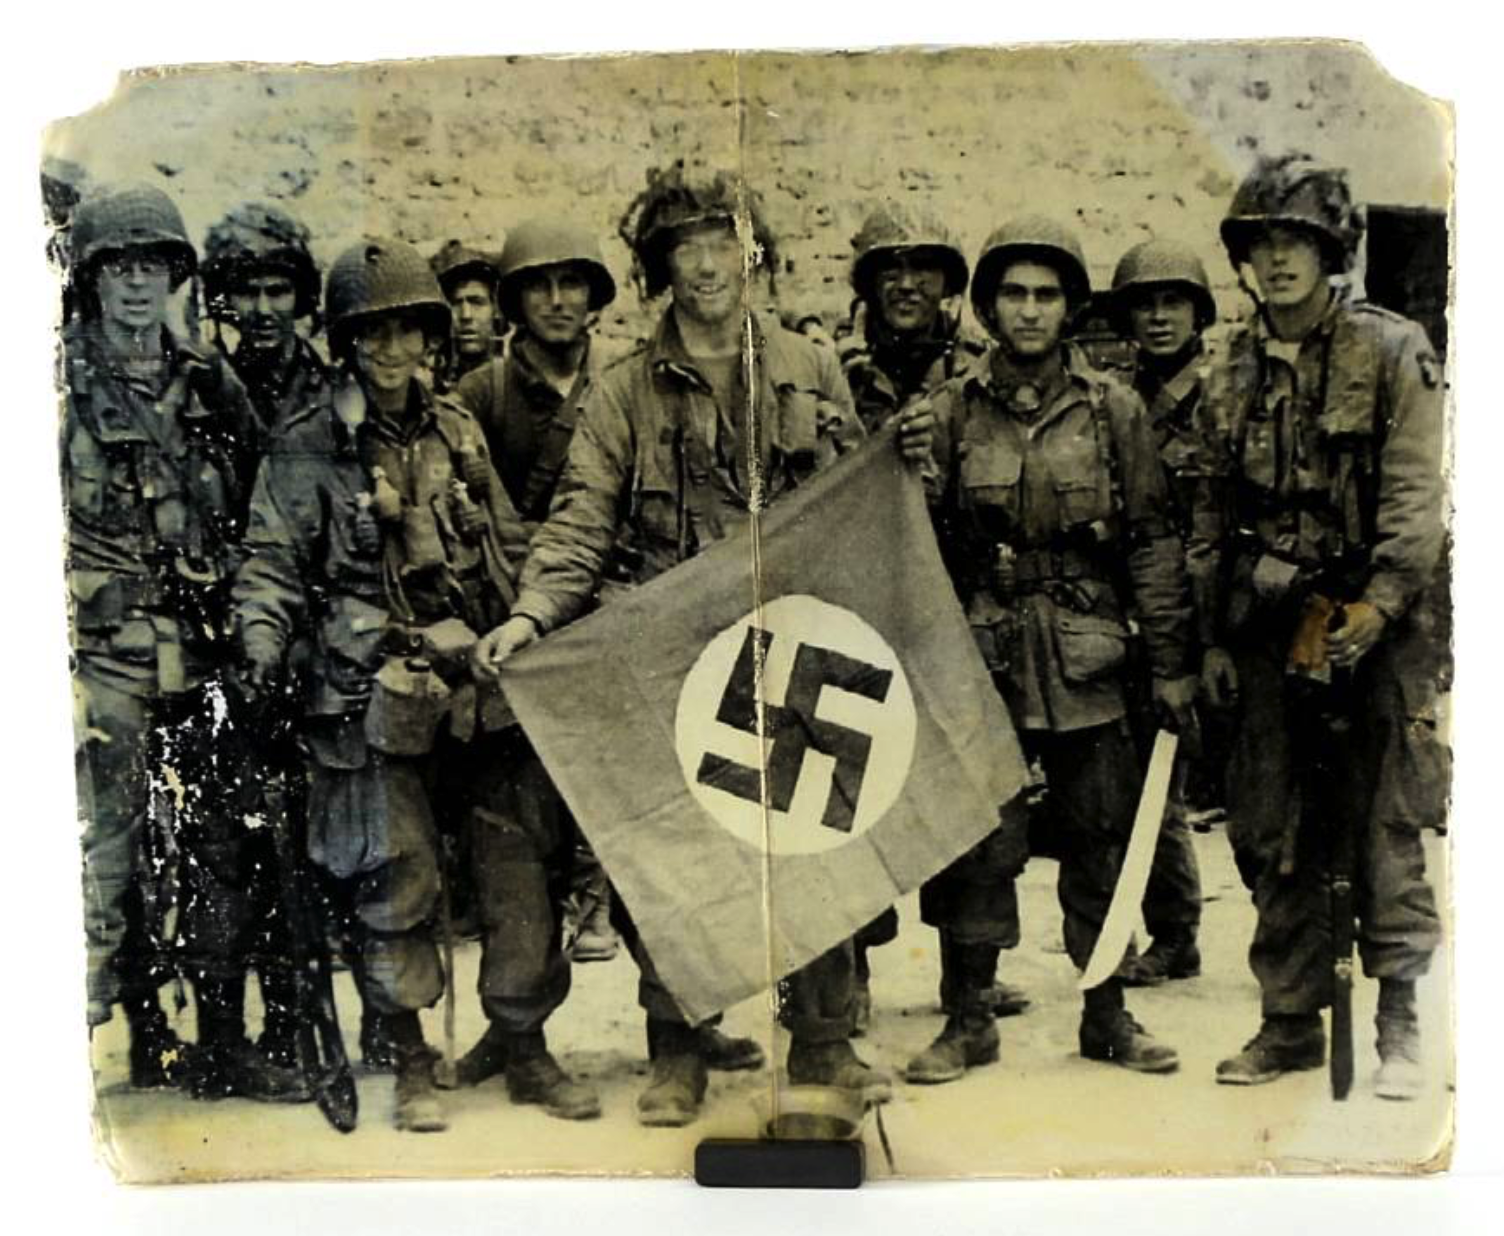 American Paratroopers capture Nazi Flag